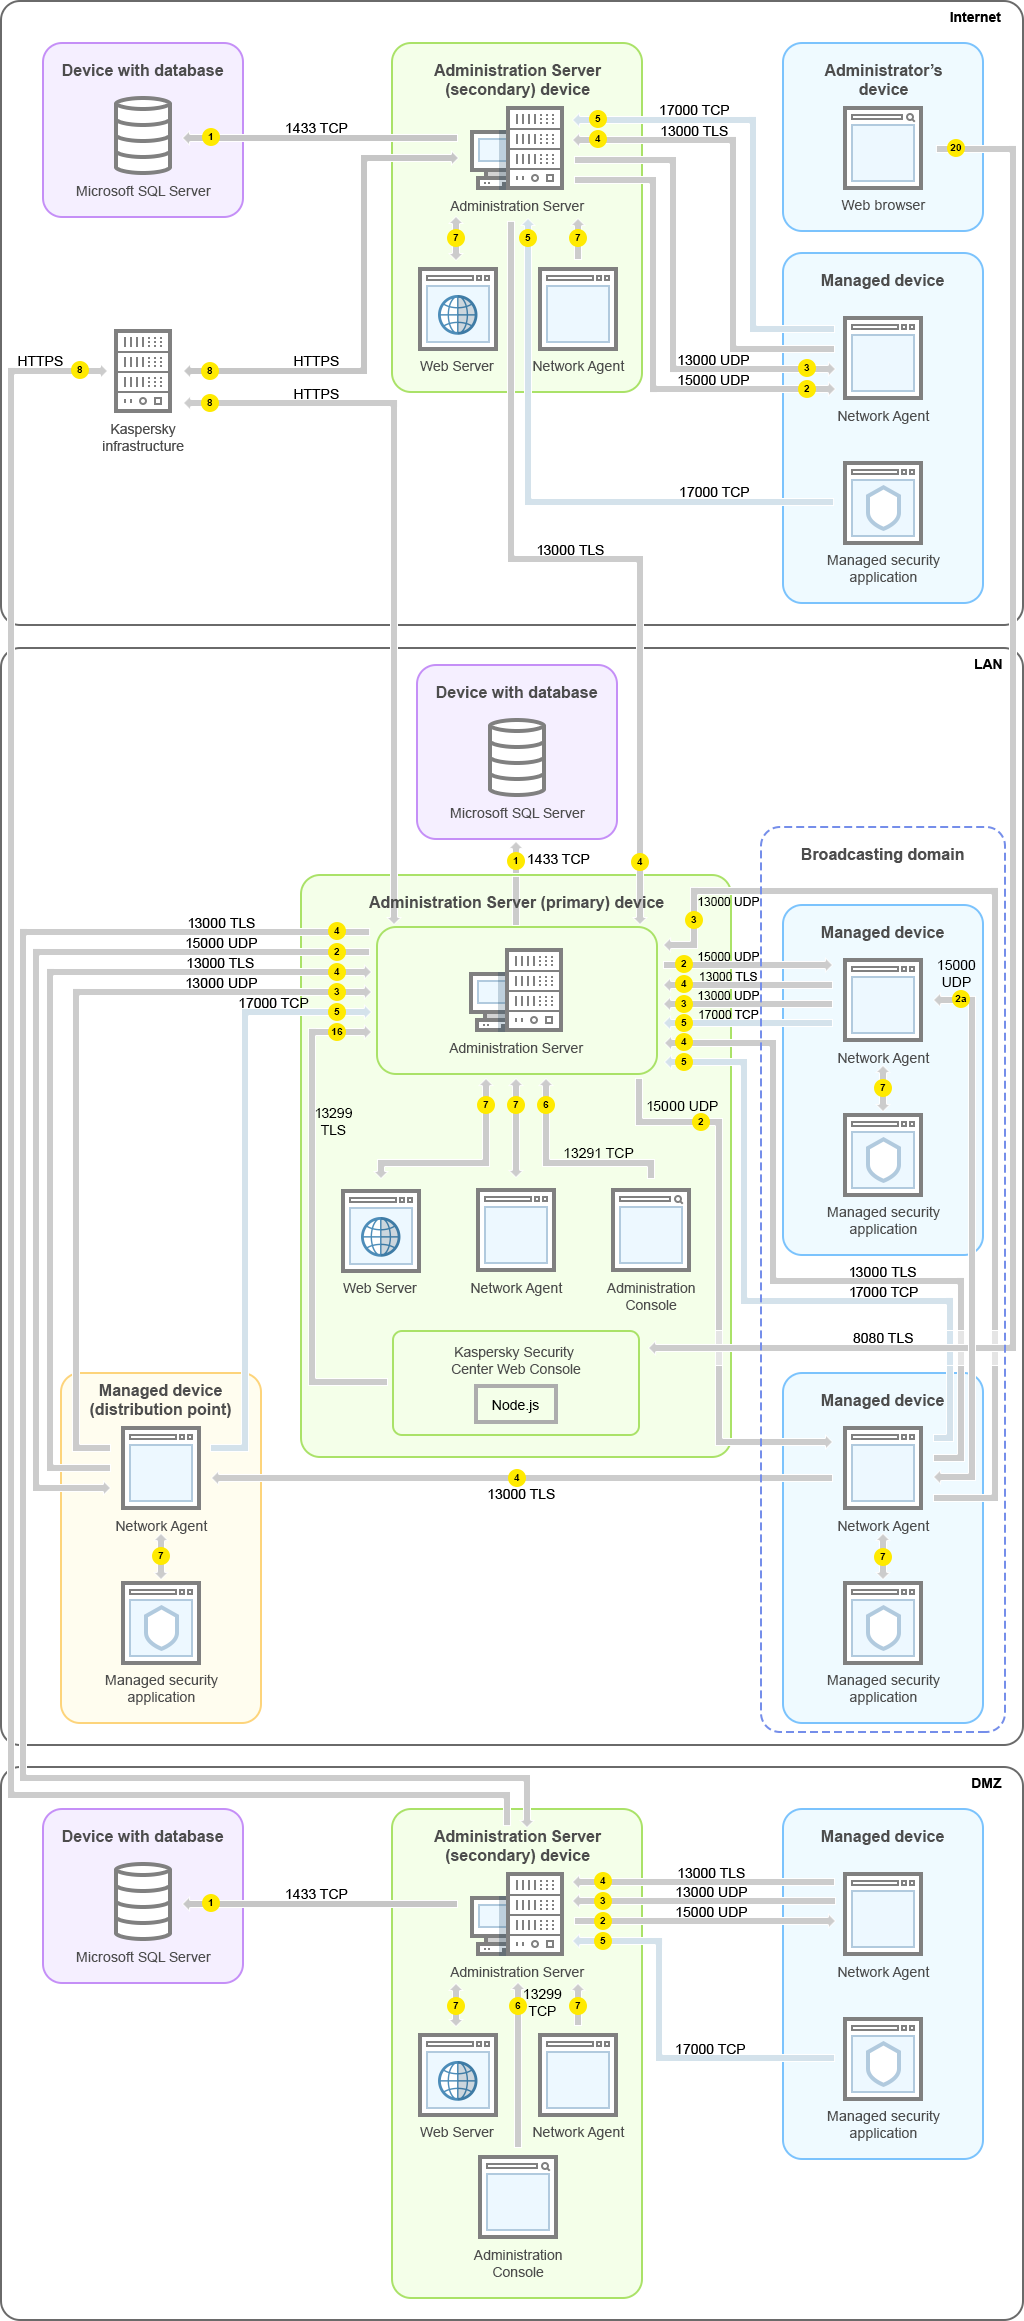 The primary Administration Server and its managed devices are on a LAN, a secondary Administration Server and its managed devices are in the DMZ,another secondary Administration Server,its managed devices,and an administrator device are on the internet.